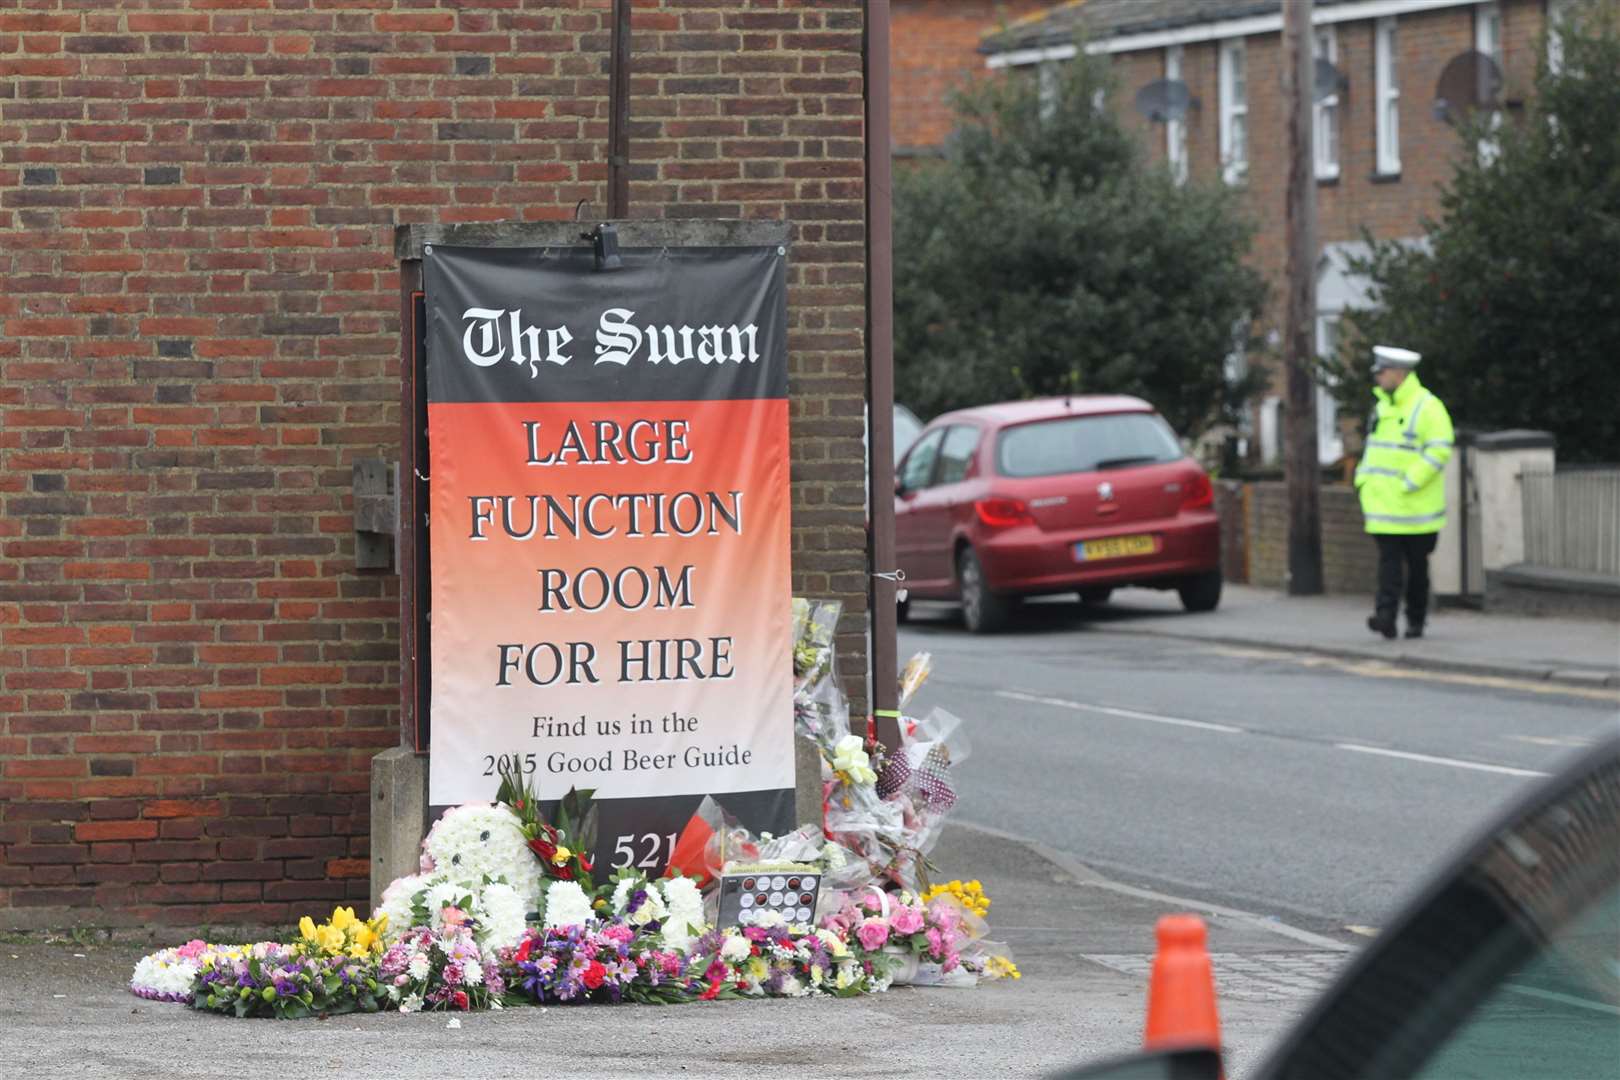 People laid flowers outside The Swan pub by the scene where a cyclist was involved in a fatal traffic accident with a lorry on the London Road in Teynham in 2016.